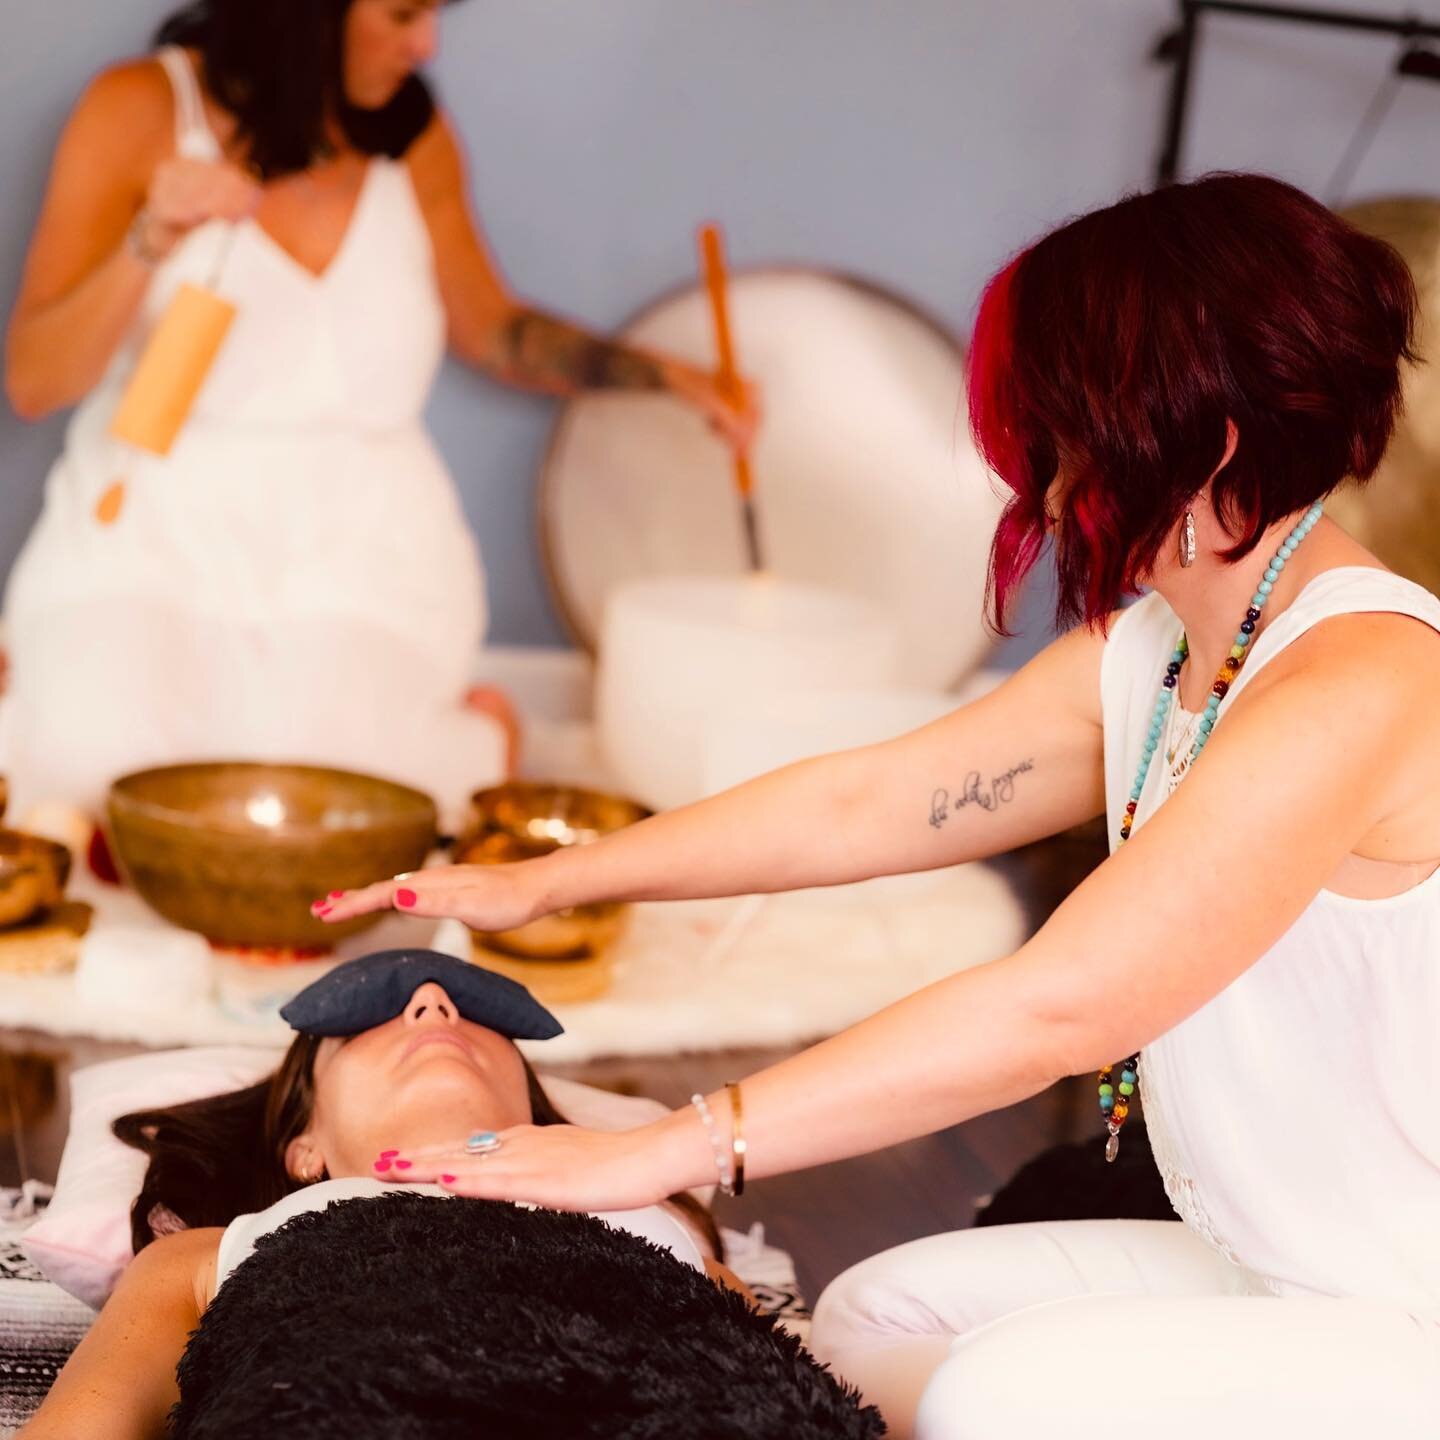 ✨REIKI SOUND BATH✨

Transport to a different mental and physical state while experiencing the relaxing sounds of multiple instruments while at the same time receiving reiki energy healing. 

Sound Baths &amp; Reiki are ancient healing techniques that